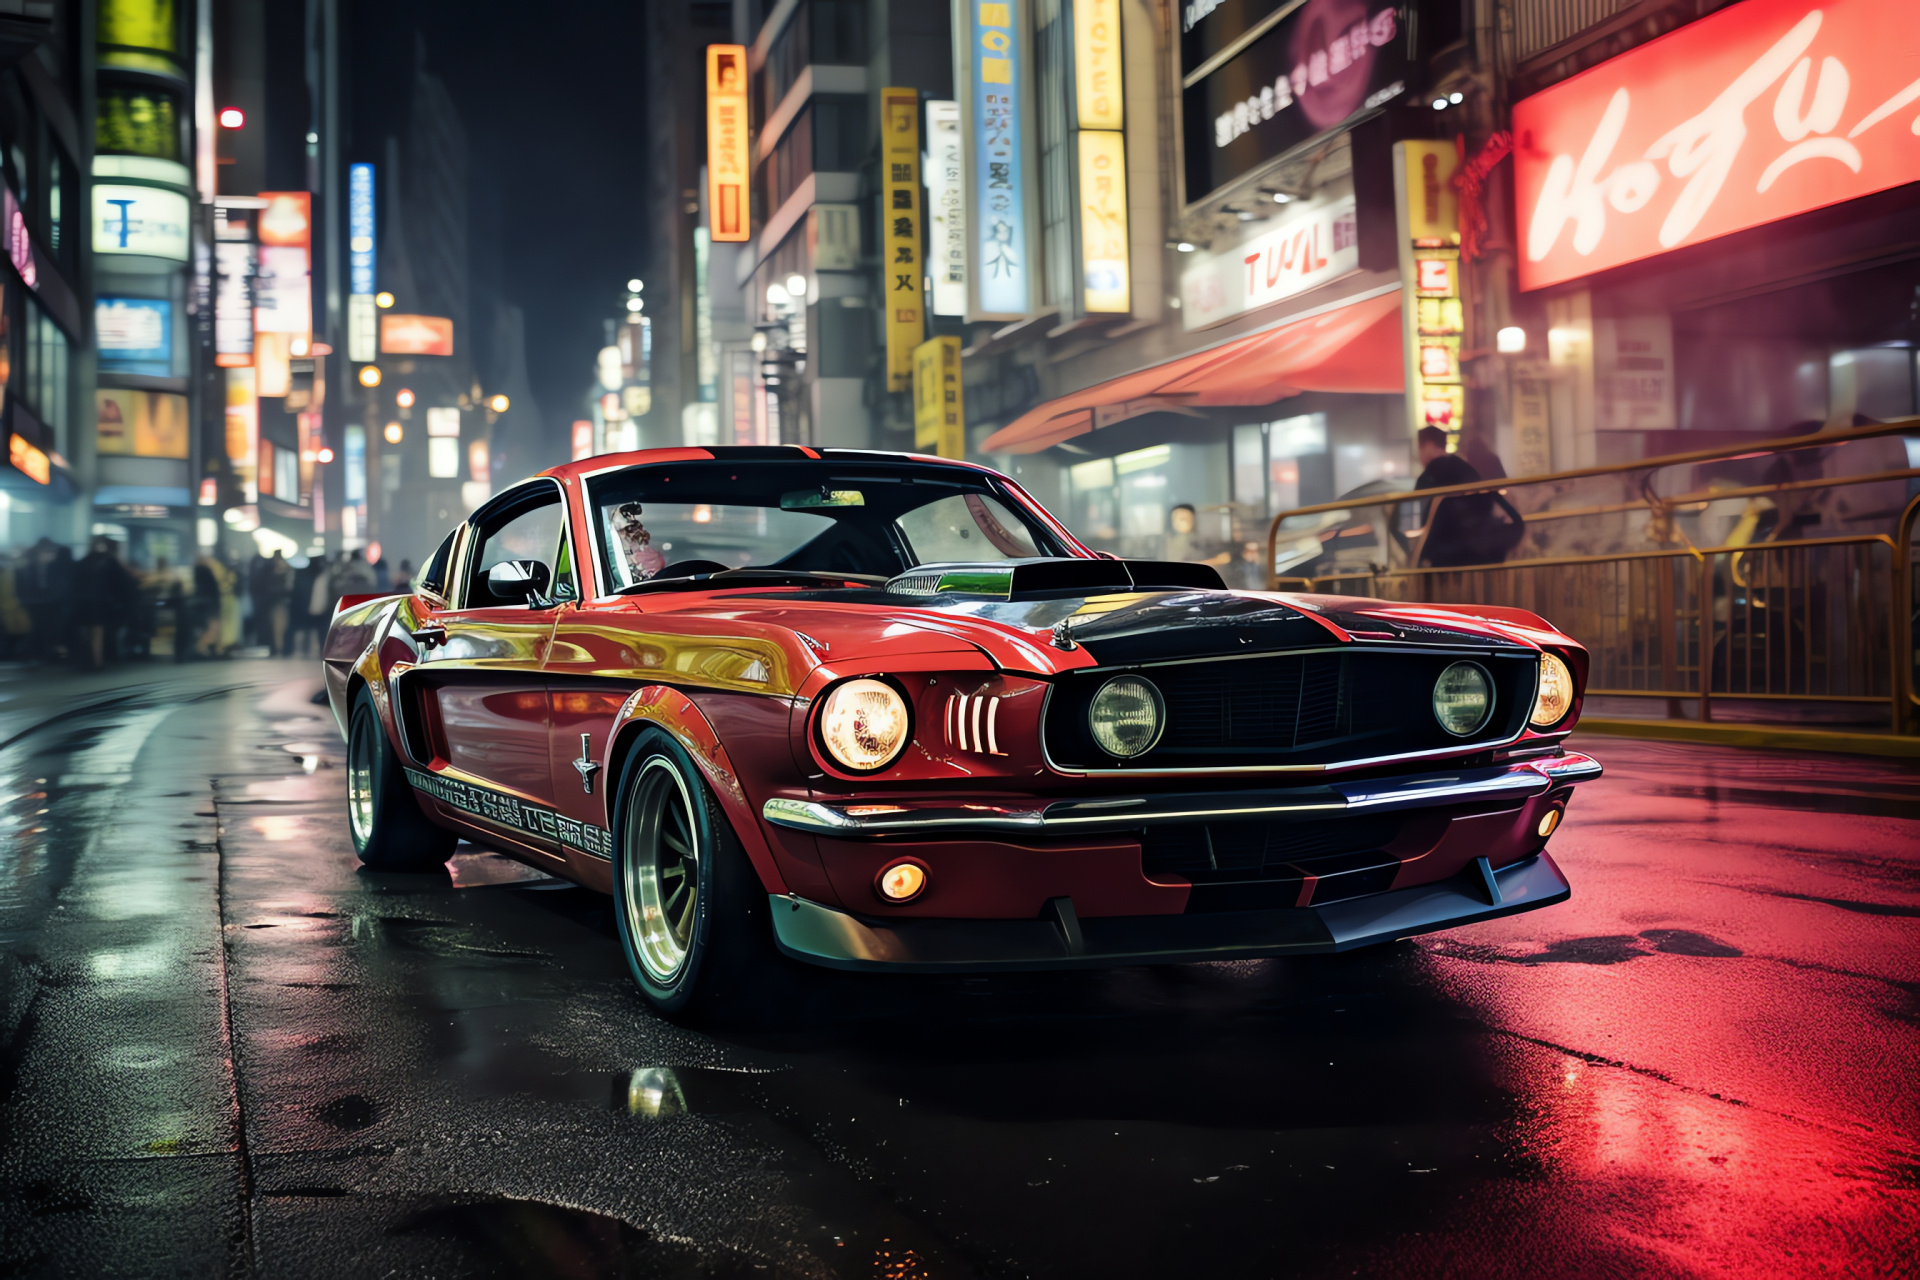 Ford Mustang in Tokyo, Urban drift art, Neon nocturne, Shibuya district, Motion and energy, HD Desktop Wallpaper